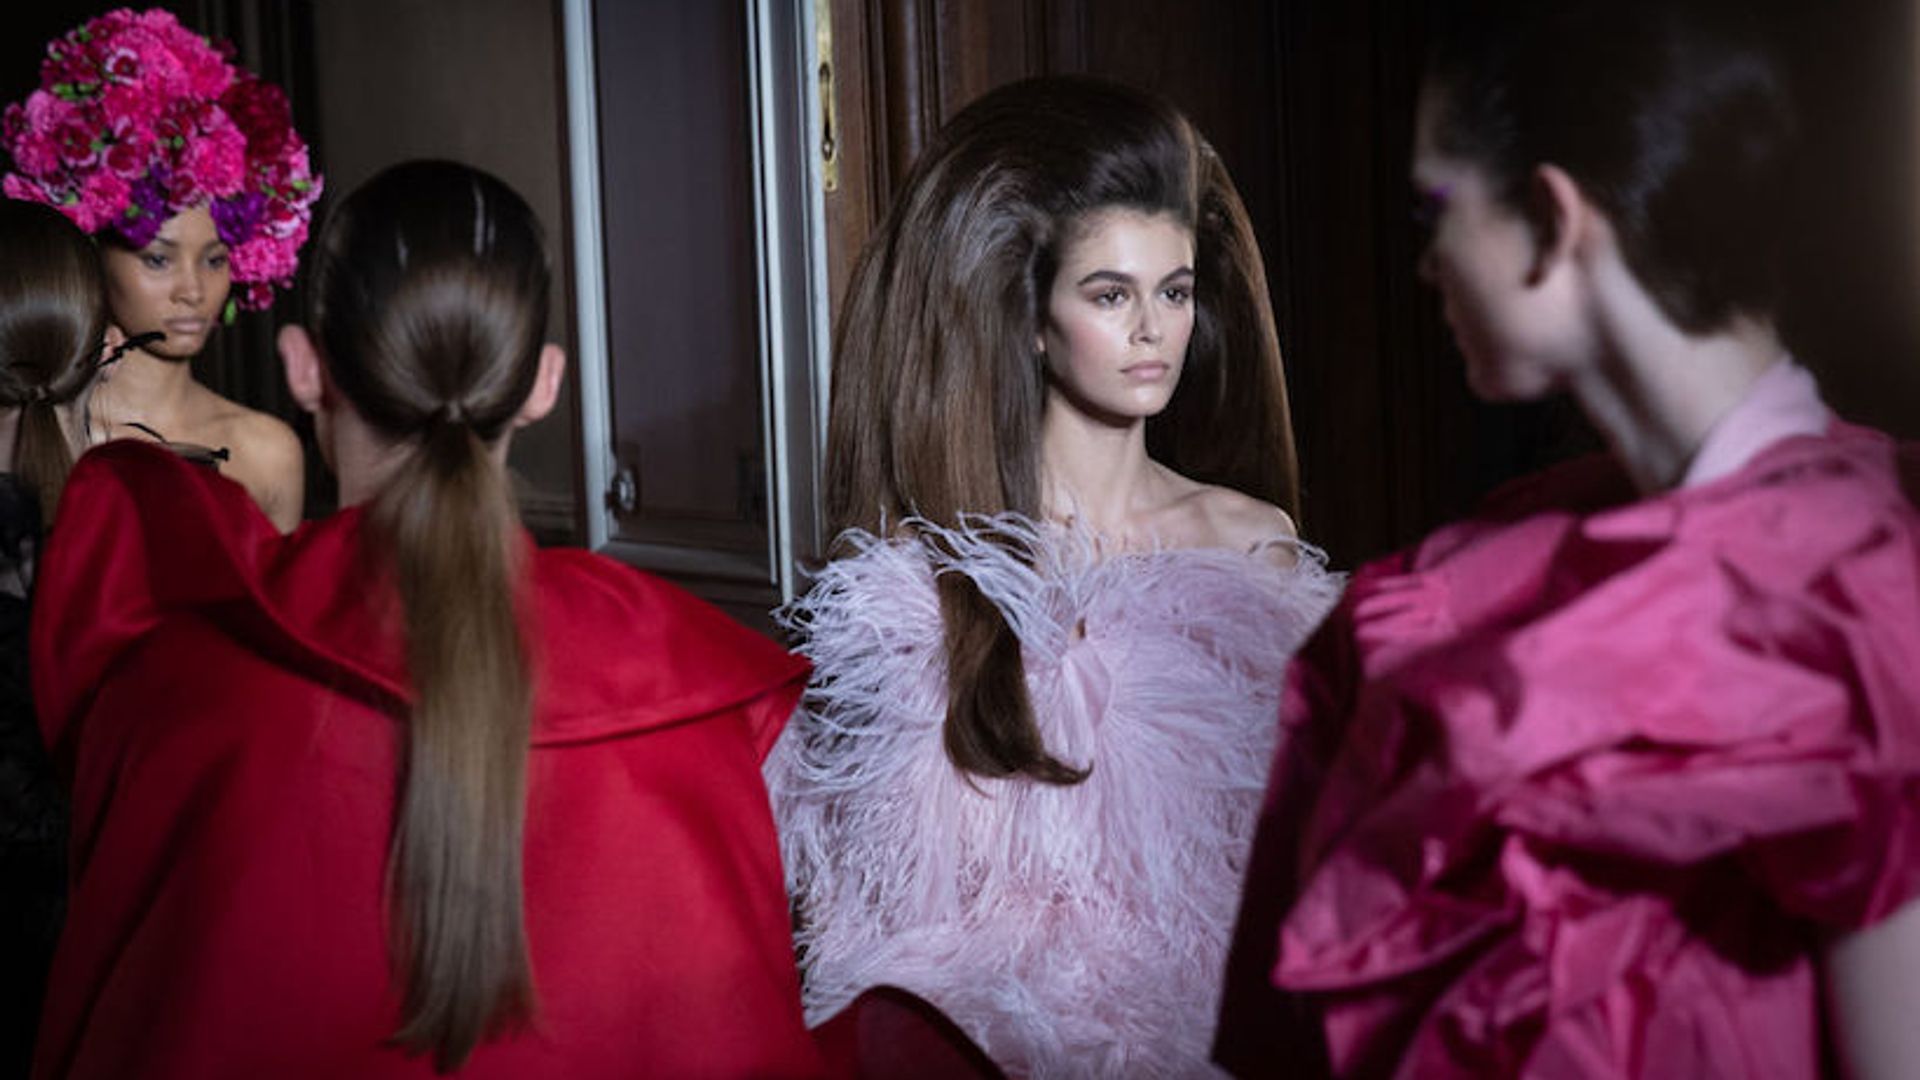 MASSIVE hair is going to be in next season - if Kaia Gerber has anything to say about it